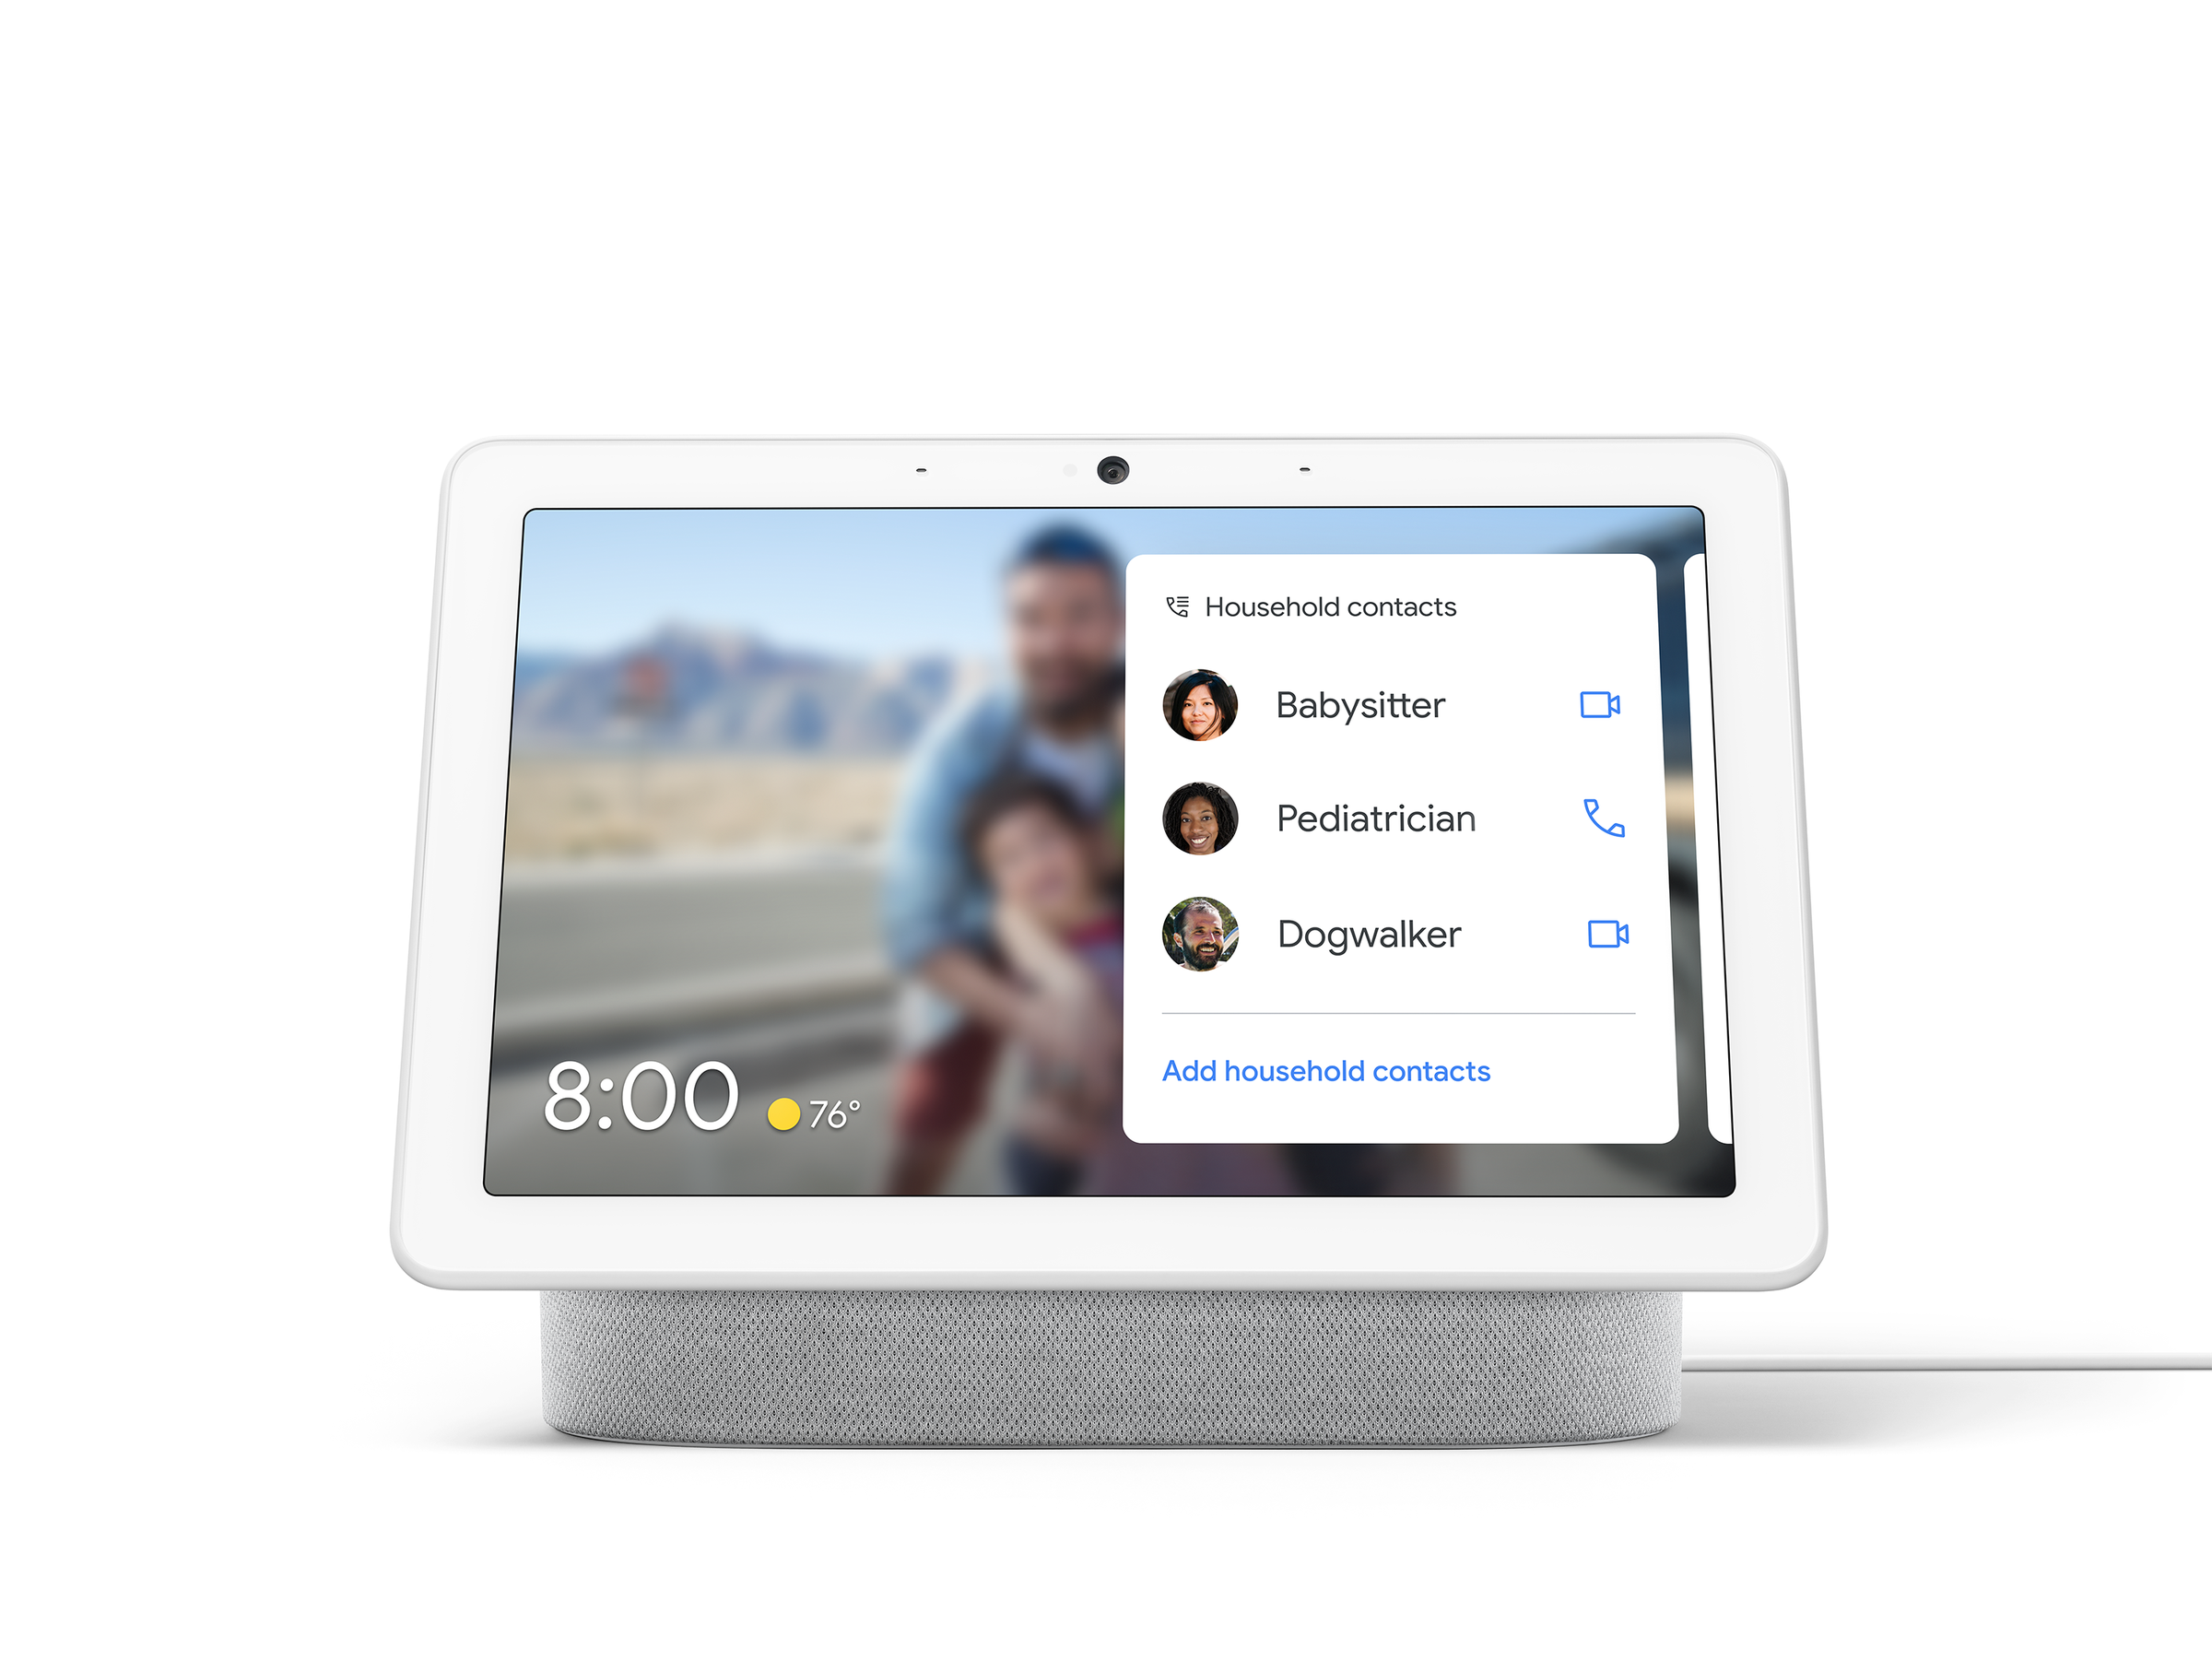 Google’s new Household Contacts feature on a Nest Hub Max smart display